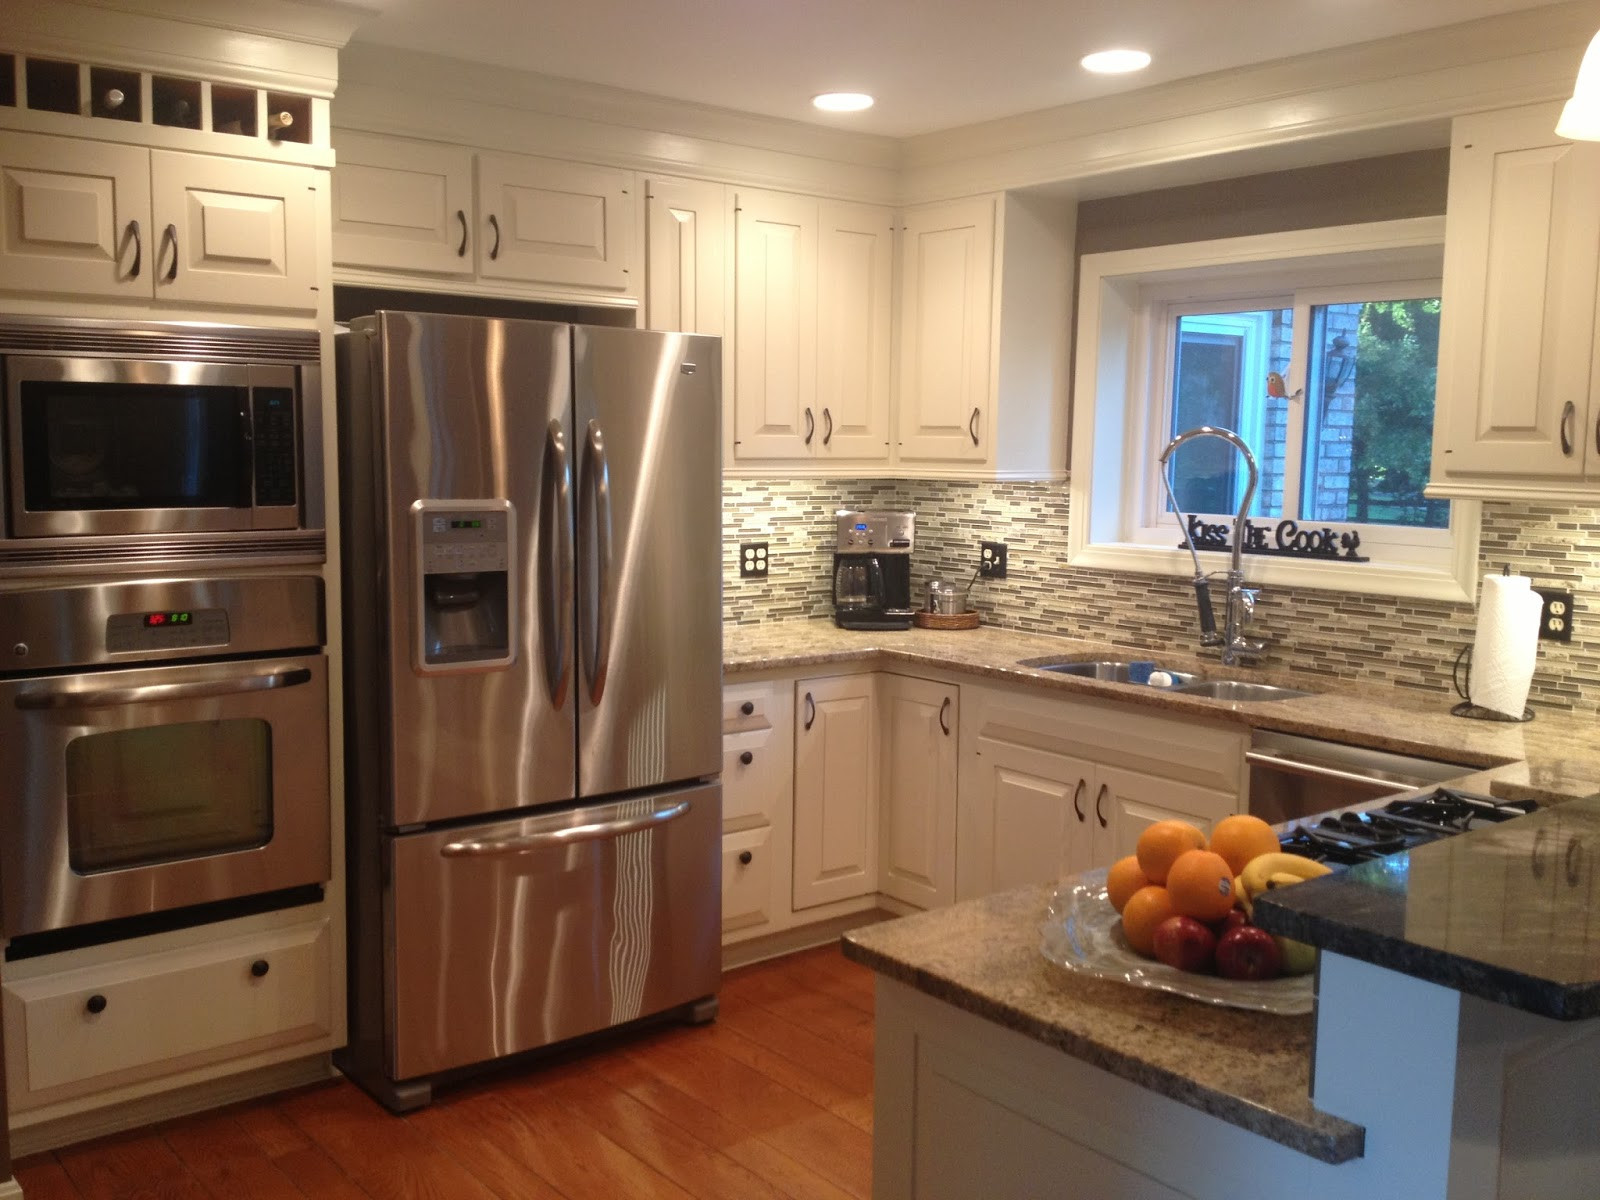 Kitchen Remodel Blogspot
 Four Seasons Style The NEW kitchen remodel on a bud